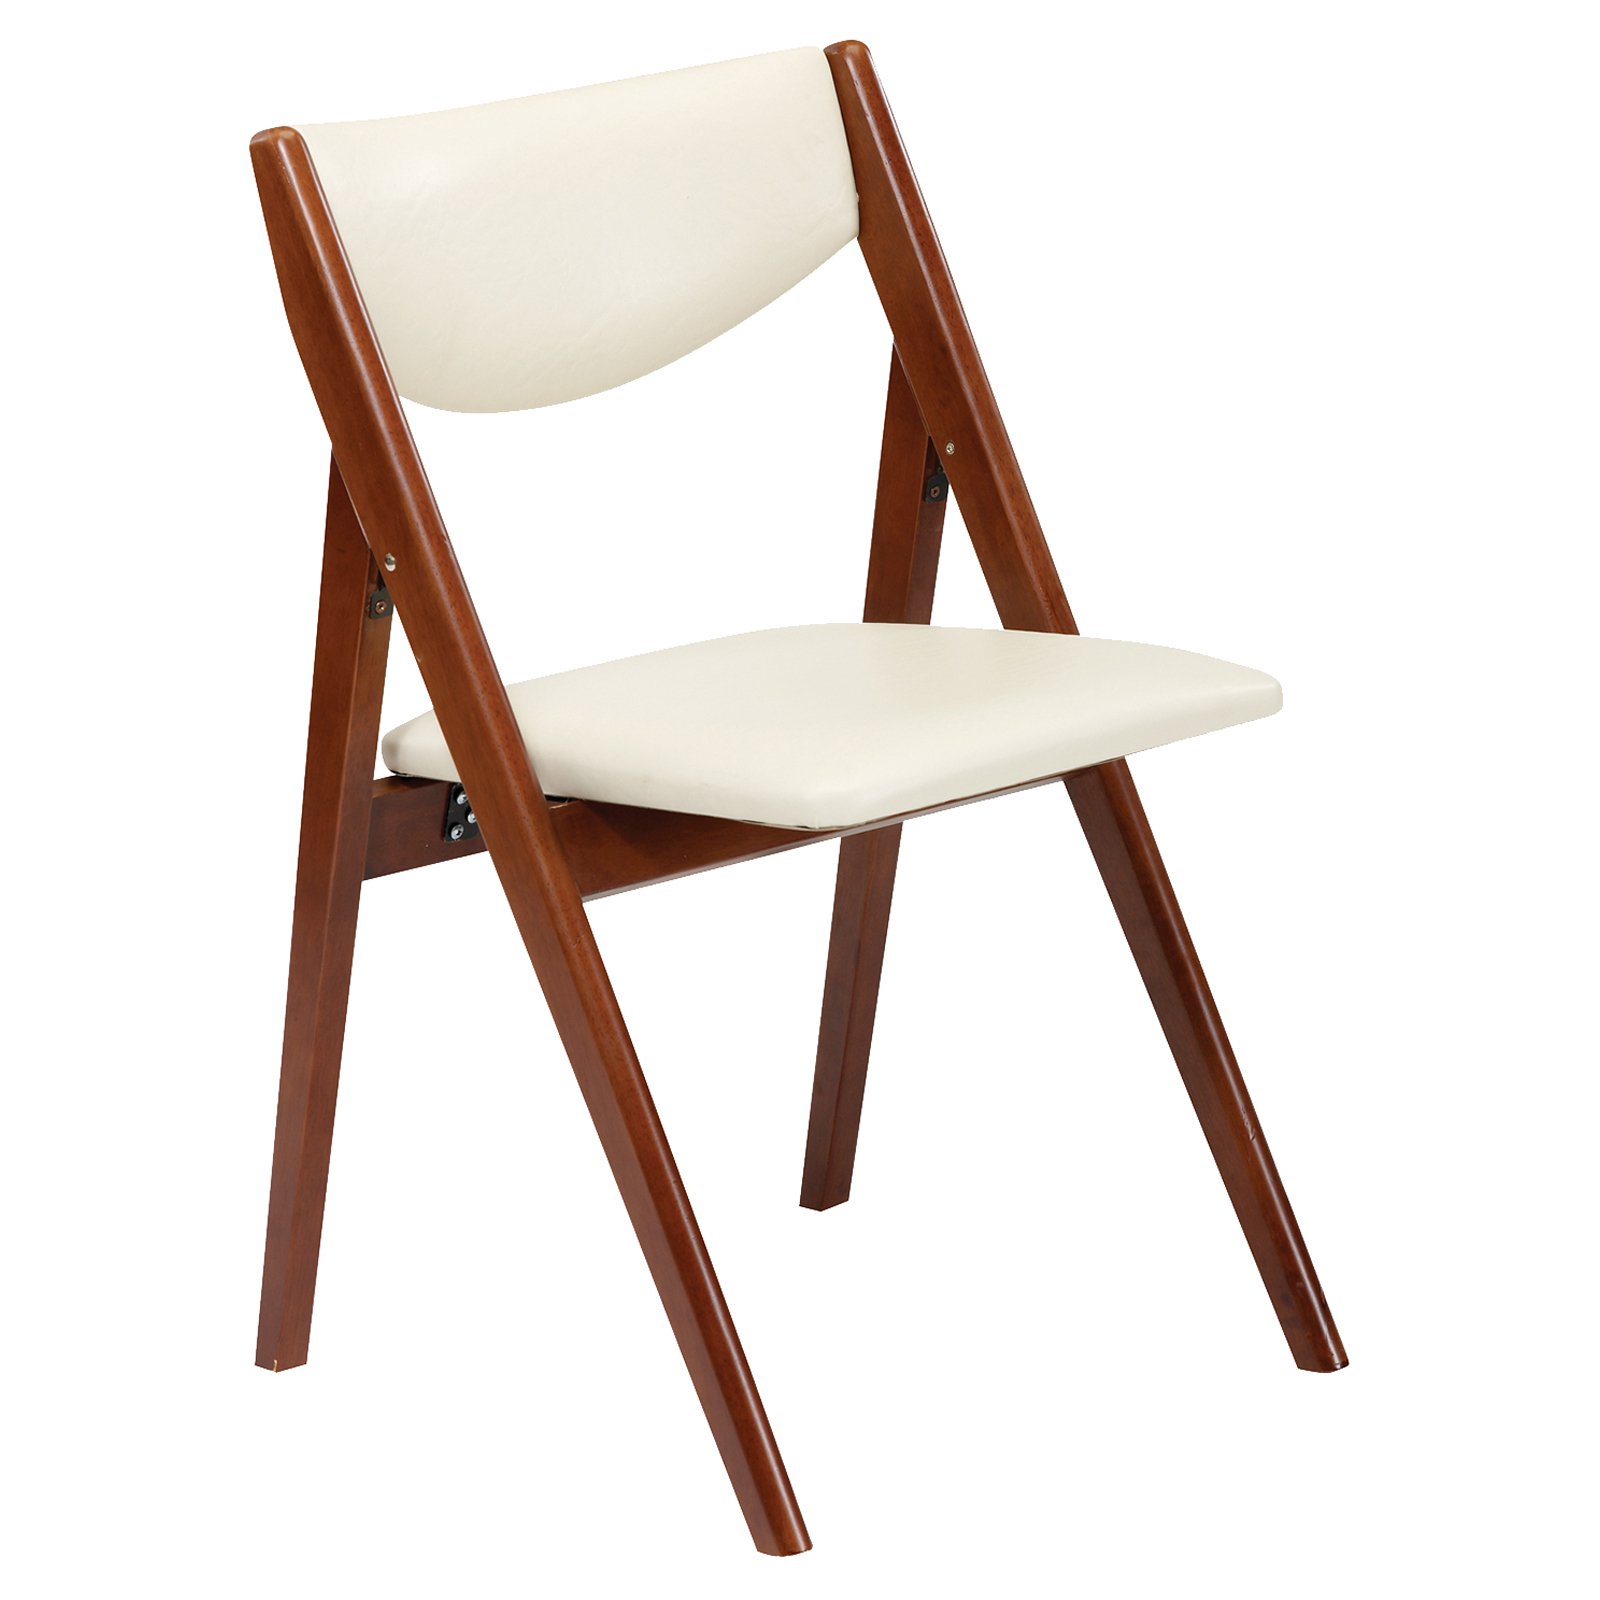 Mid-Century Modern Crème Vinyl Padded Folding Chair (2-Pack) with Wood Accents - image 1 of 2